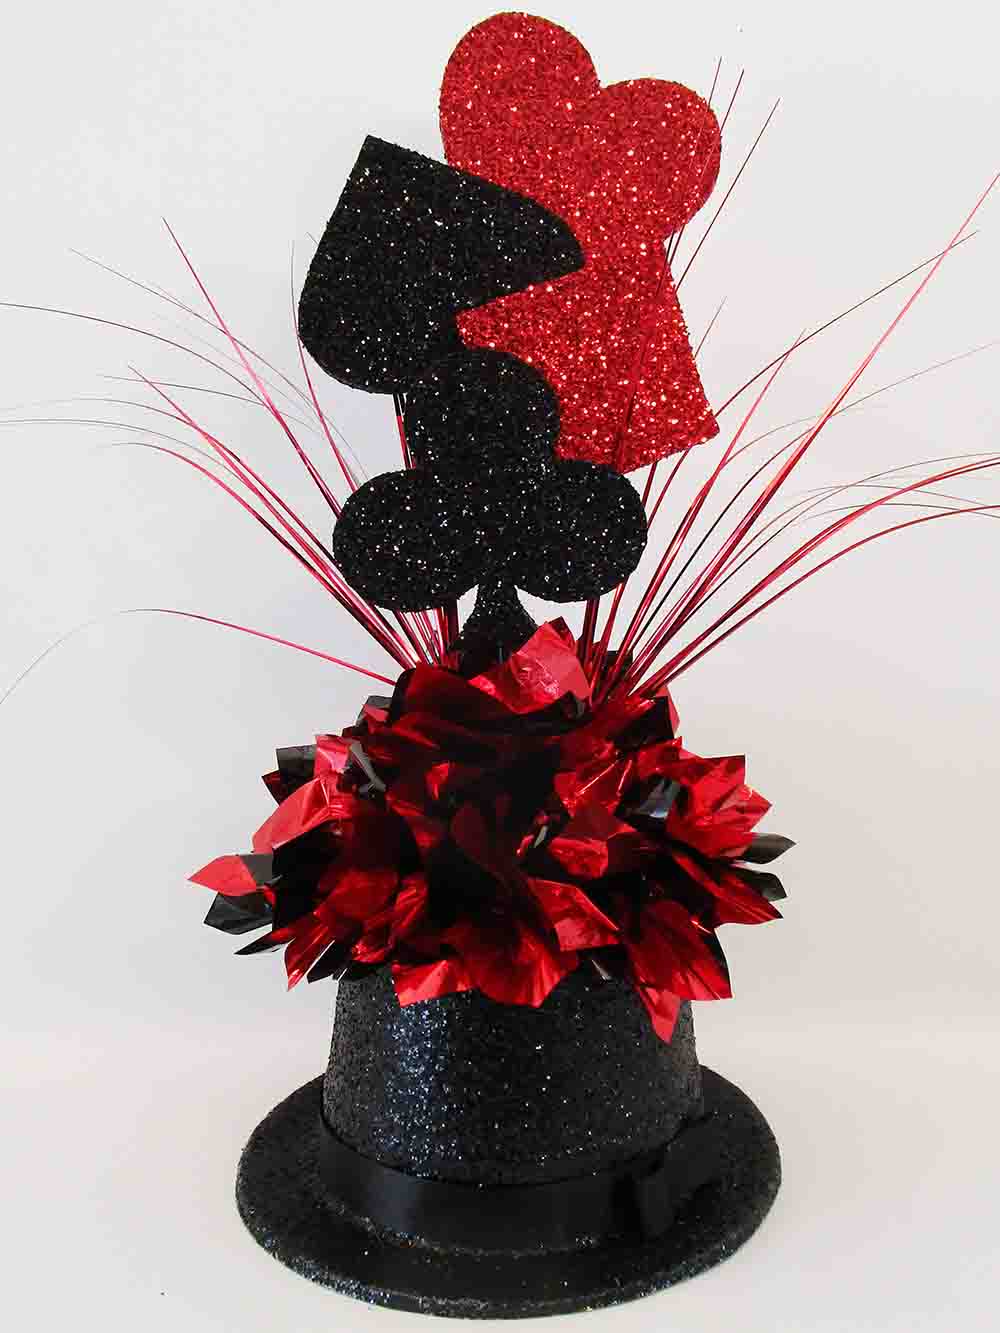 Top hat with spade, heart, diamond and club centerpiece - Designs by Ginny